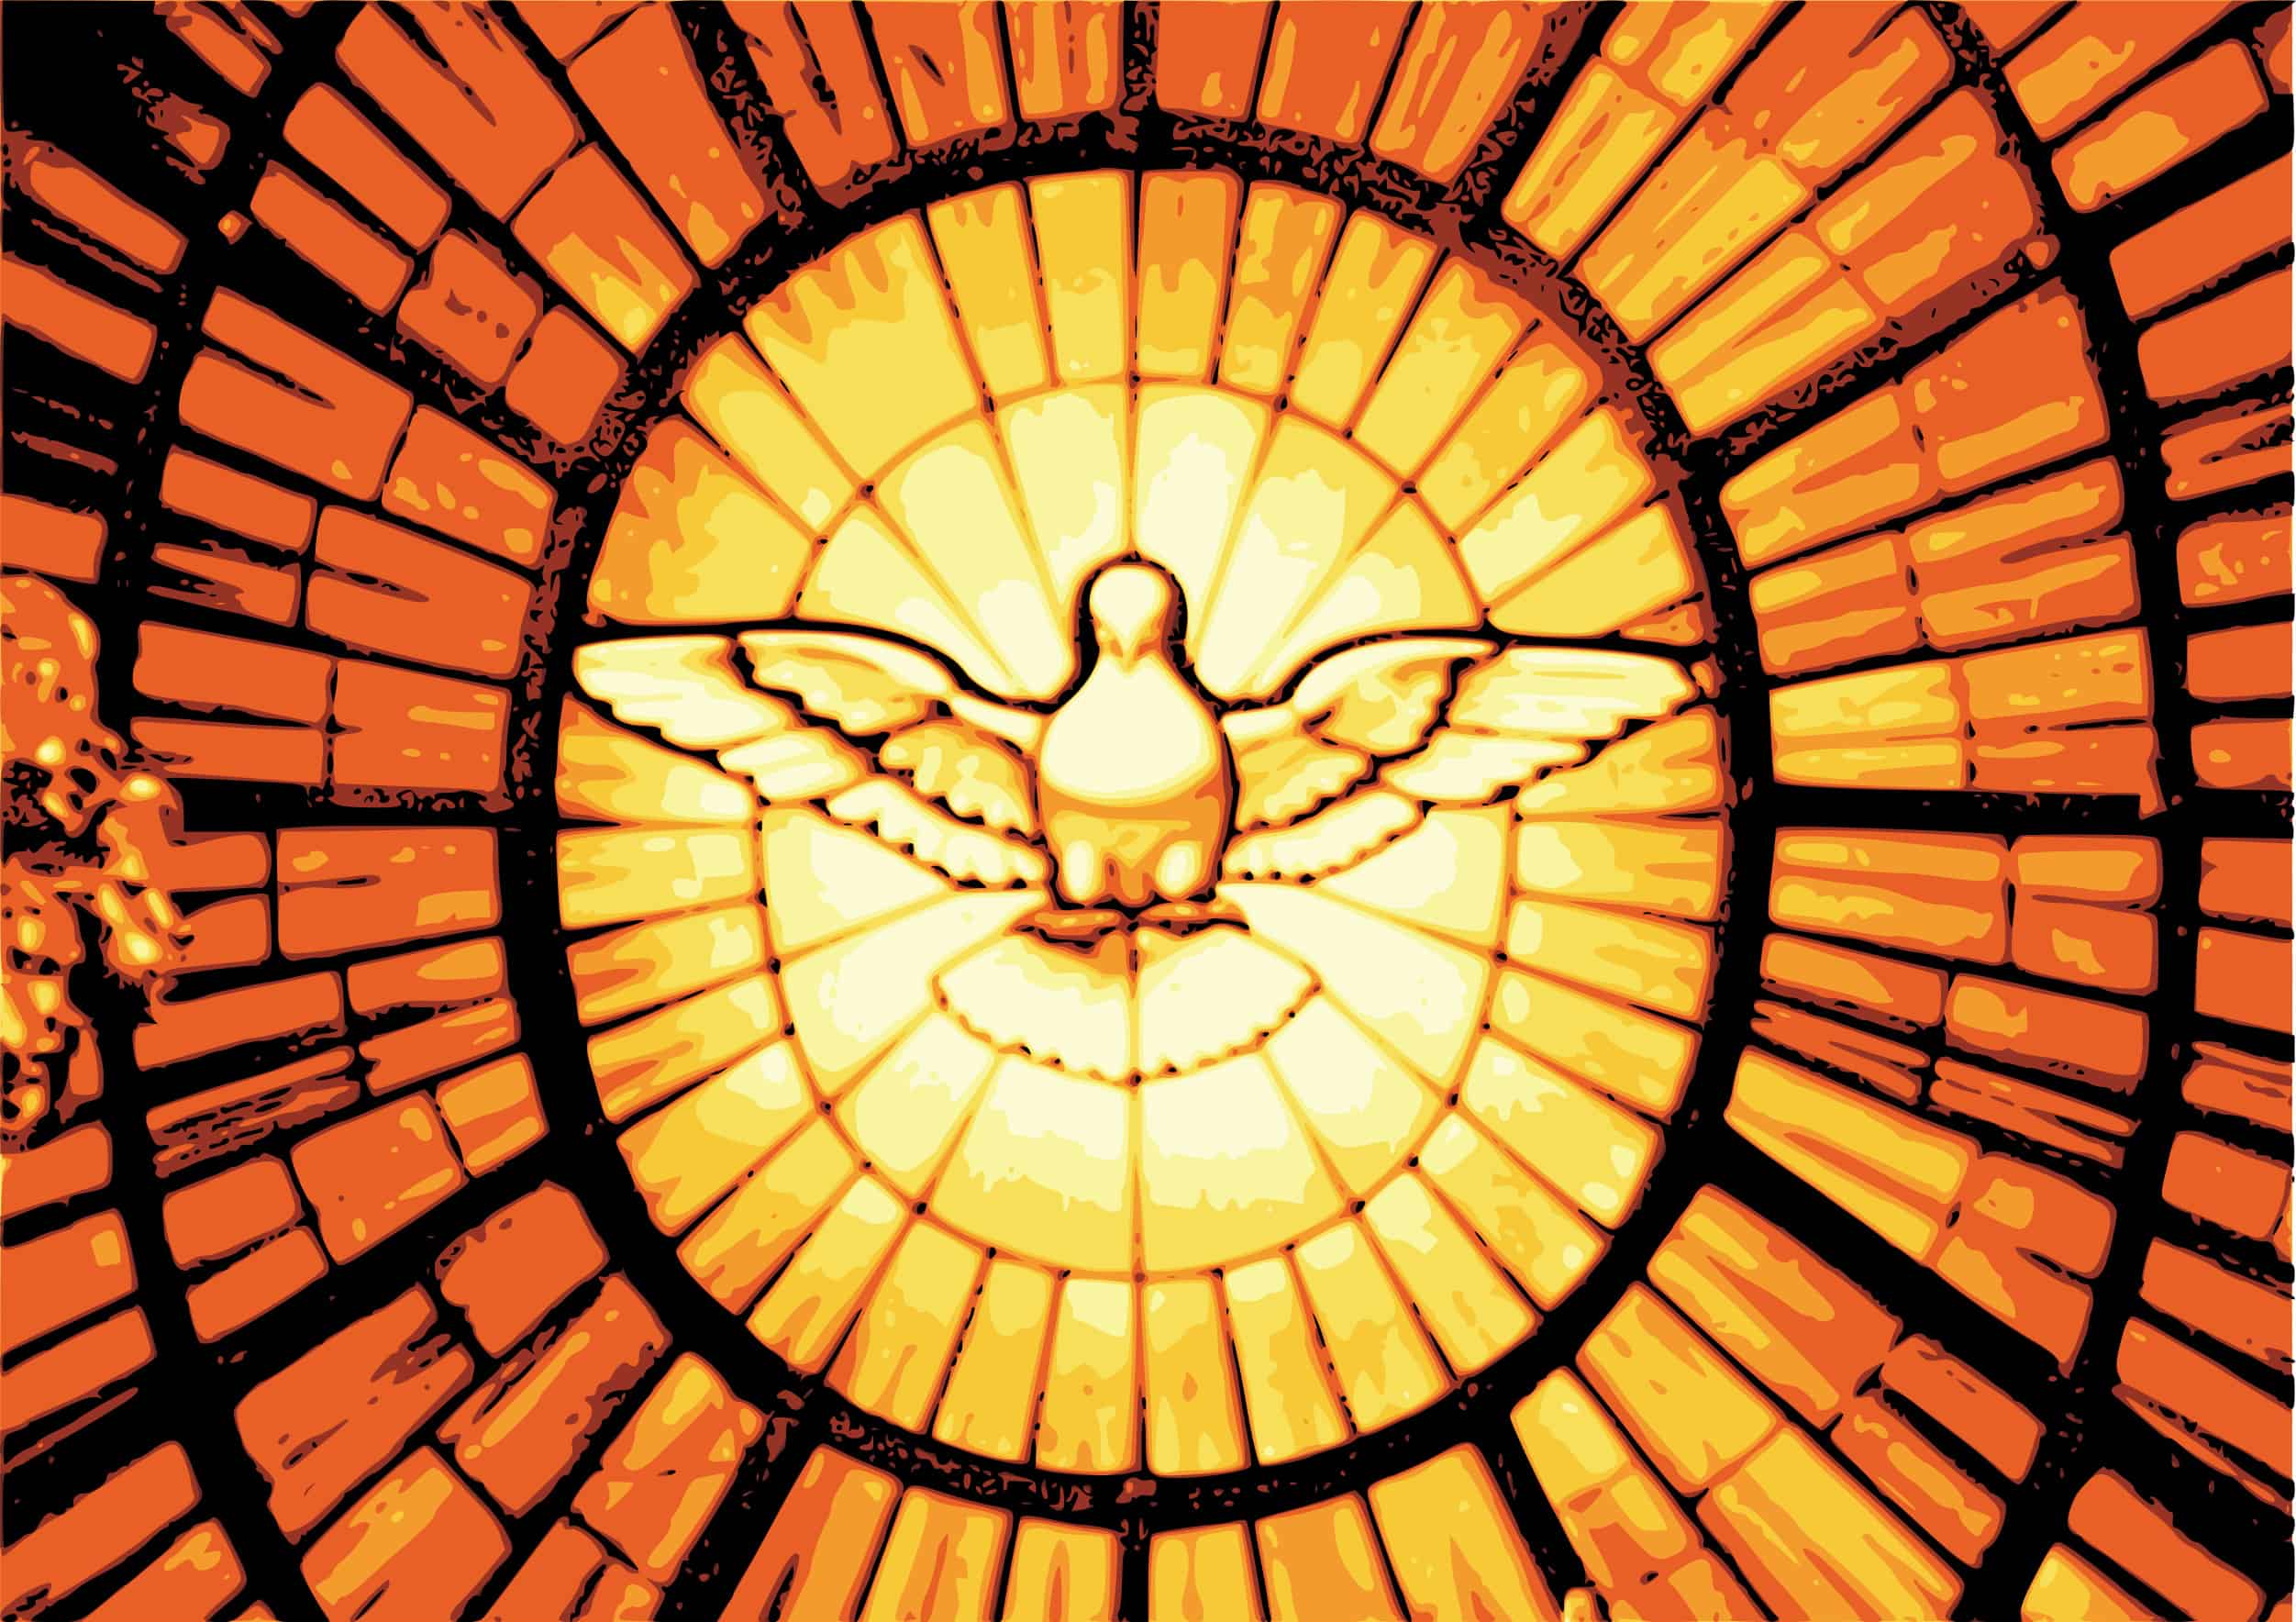 A dove is seen in a stained glass looking piece that is amber in color and representing the Holy Ghost.